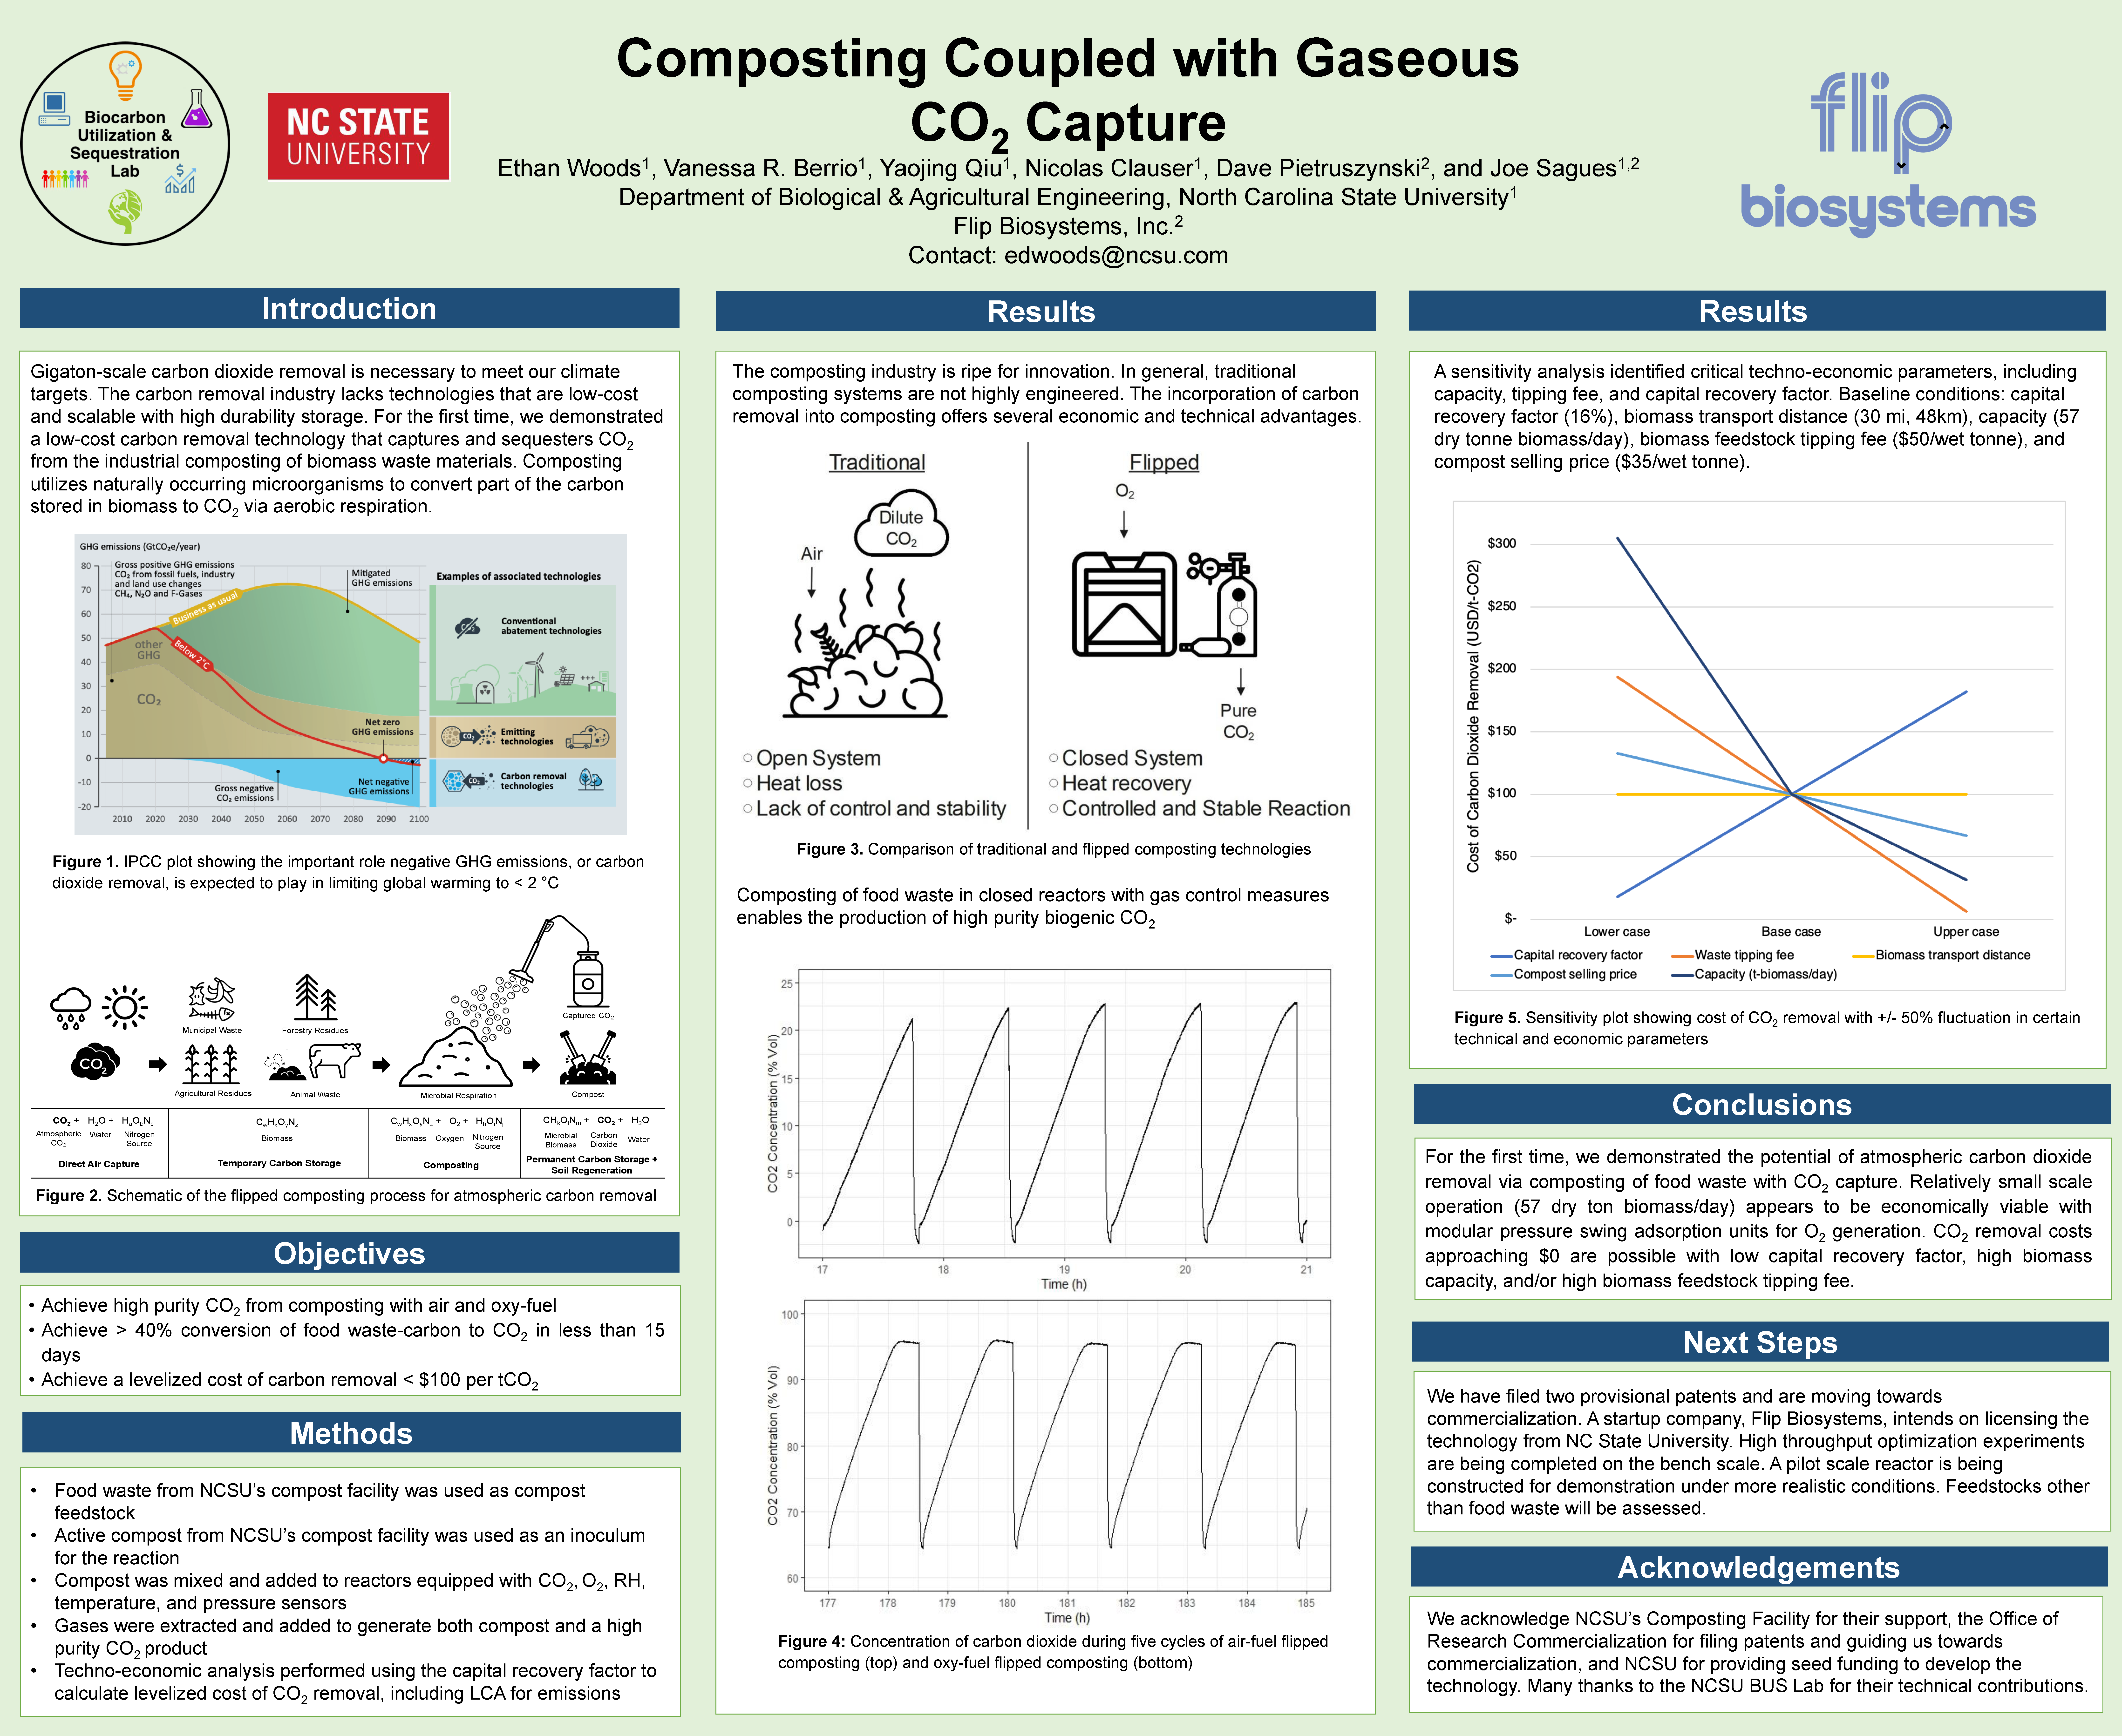 image of Ethan Woods' poster, "Composting Coupled with Gaseous CO2 Capture"